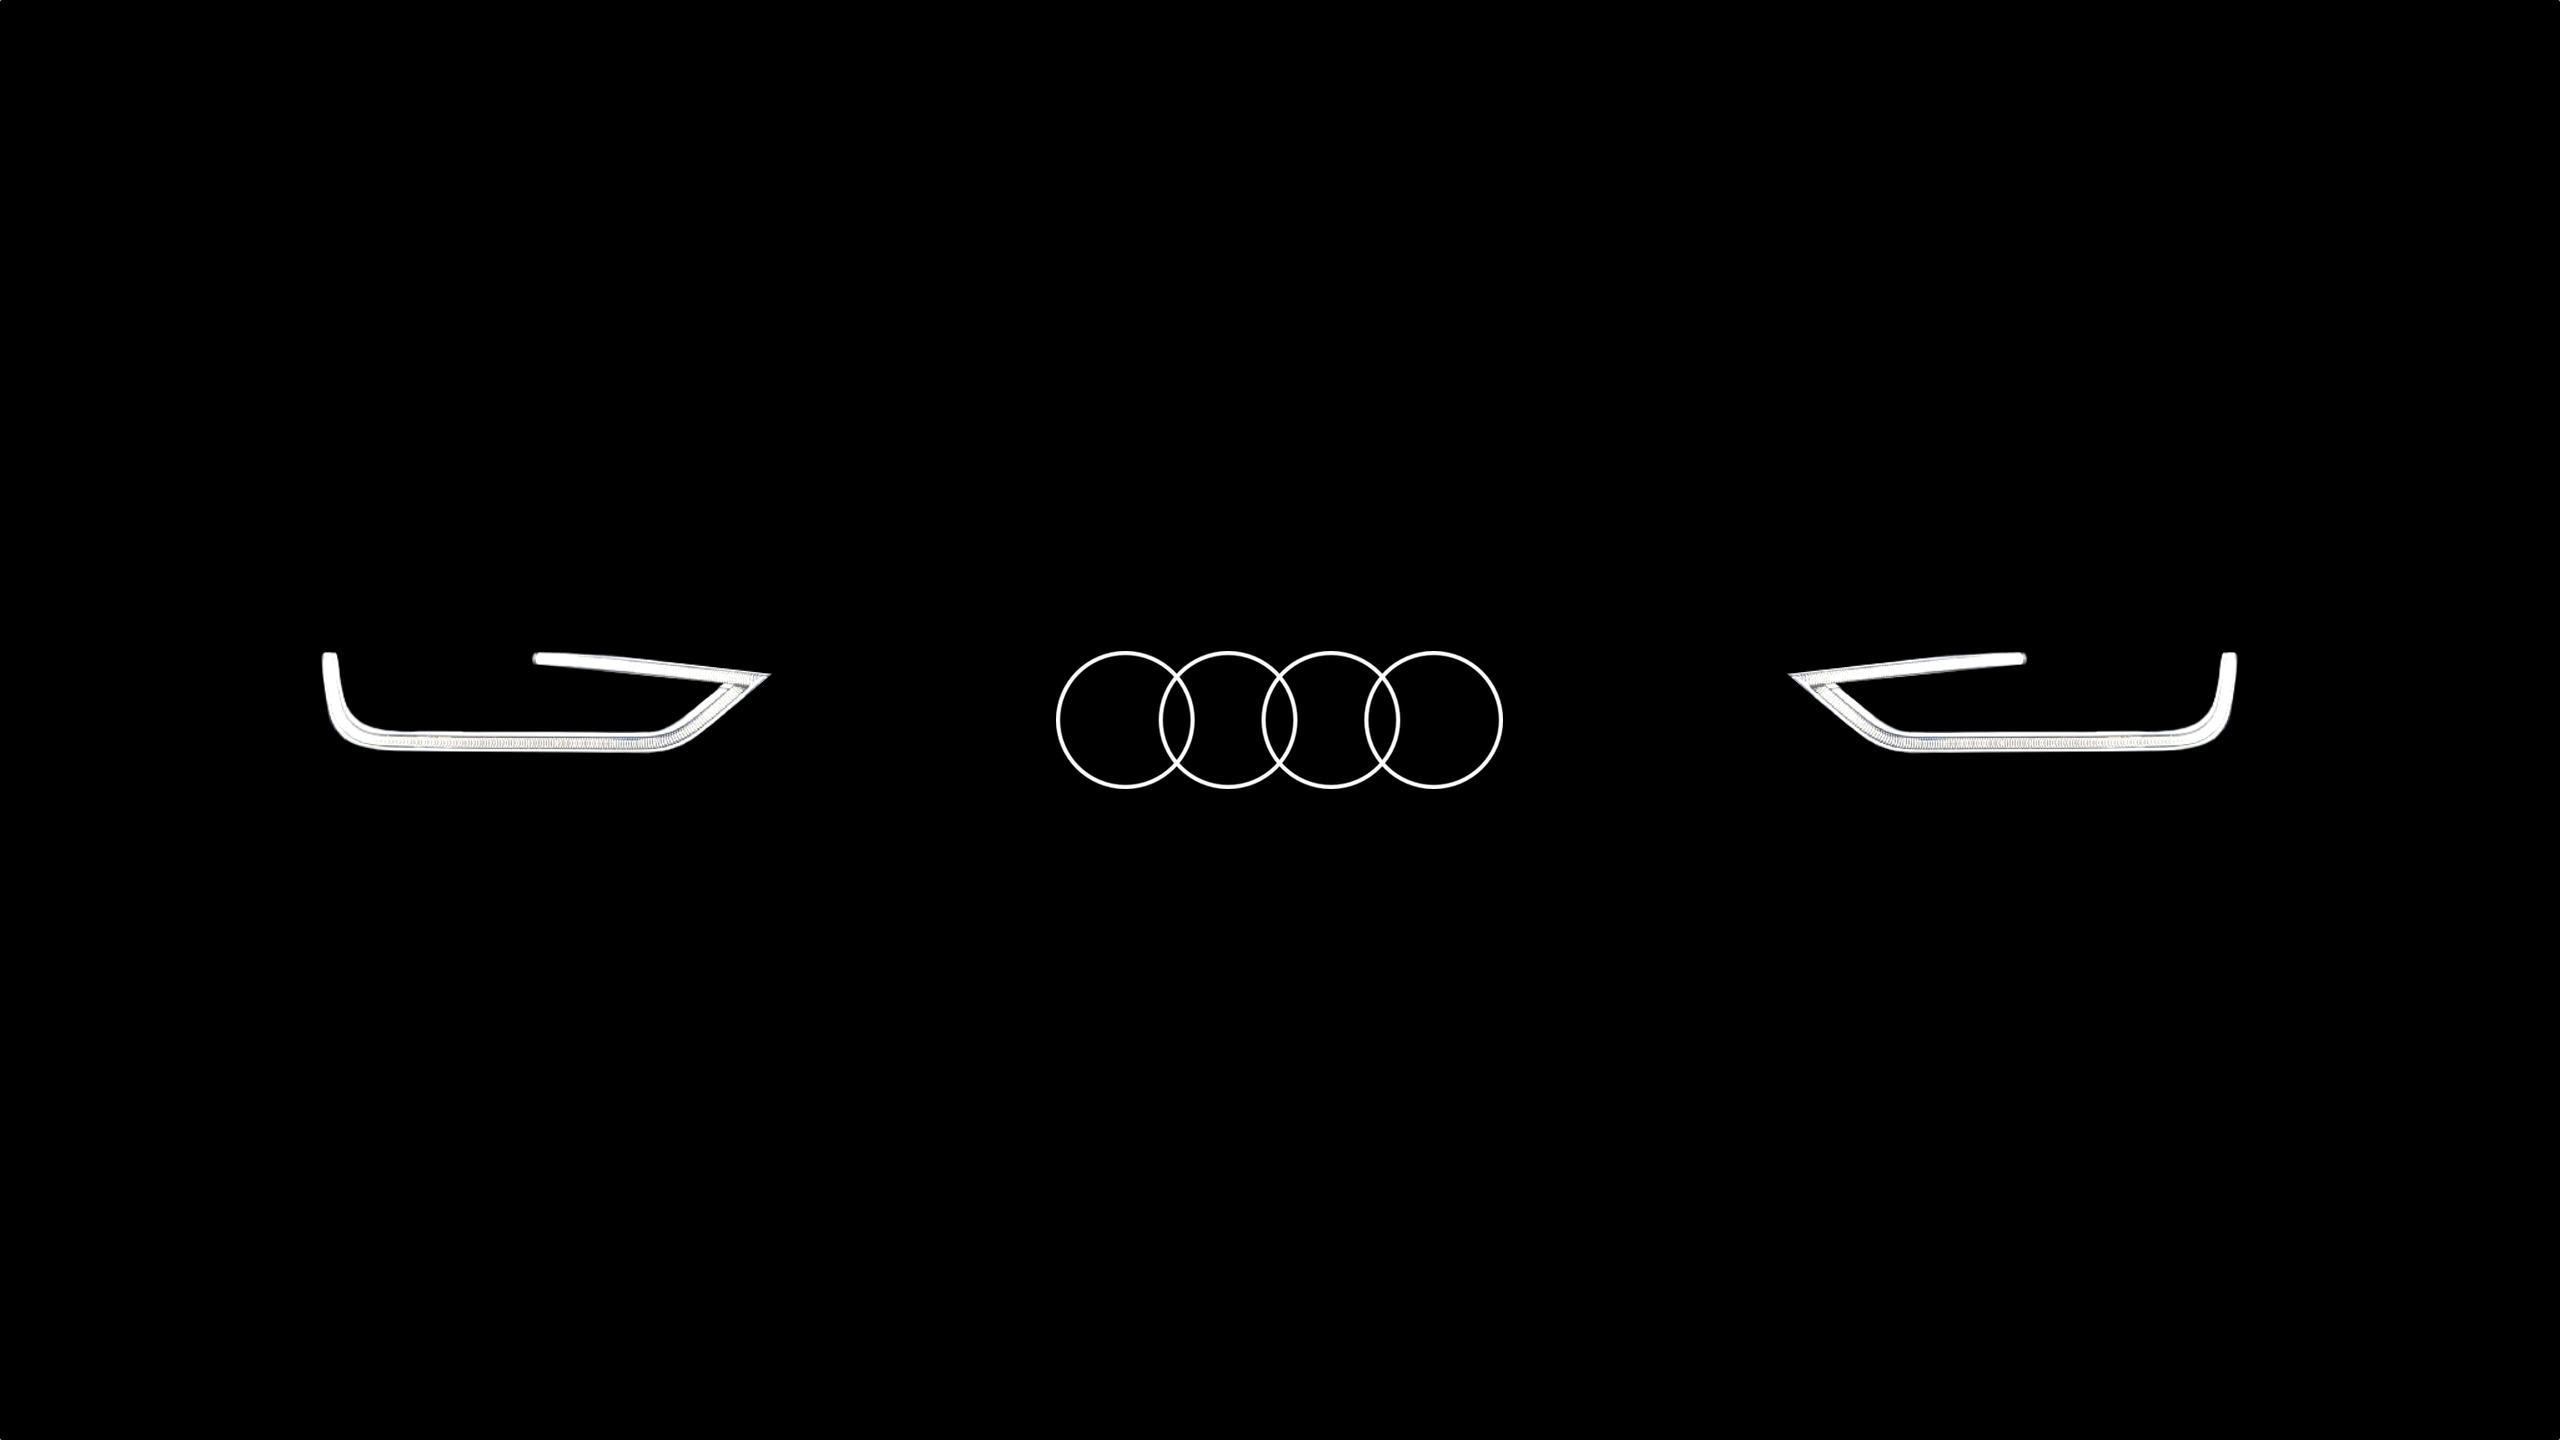 Audi rings logo stickers and decals